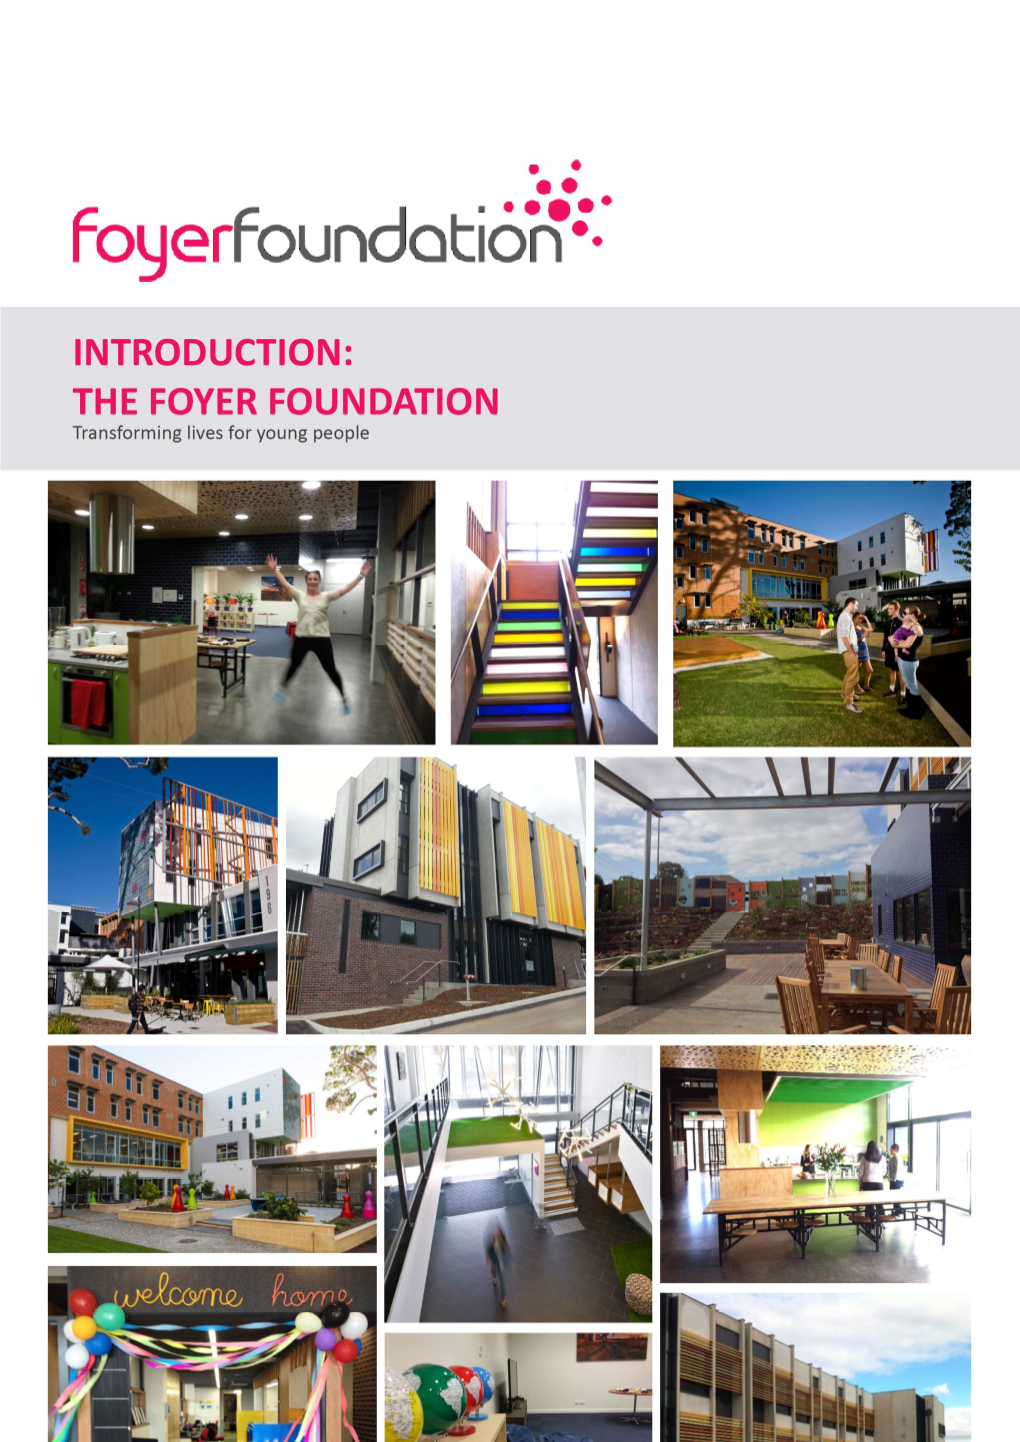 Foyer Foundation Overview